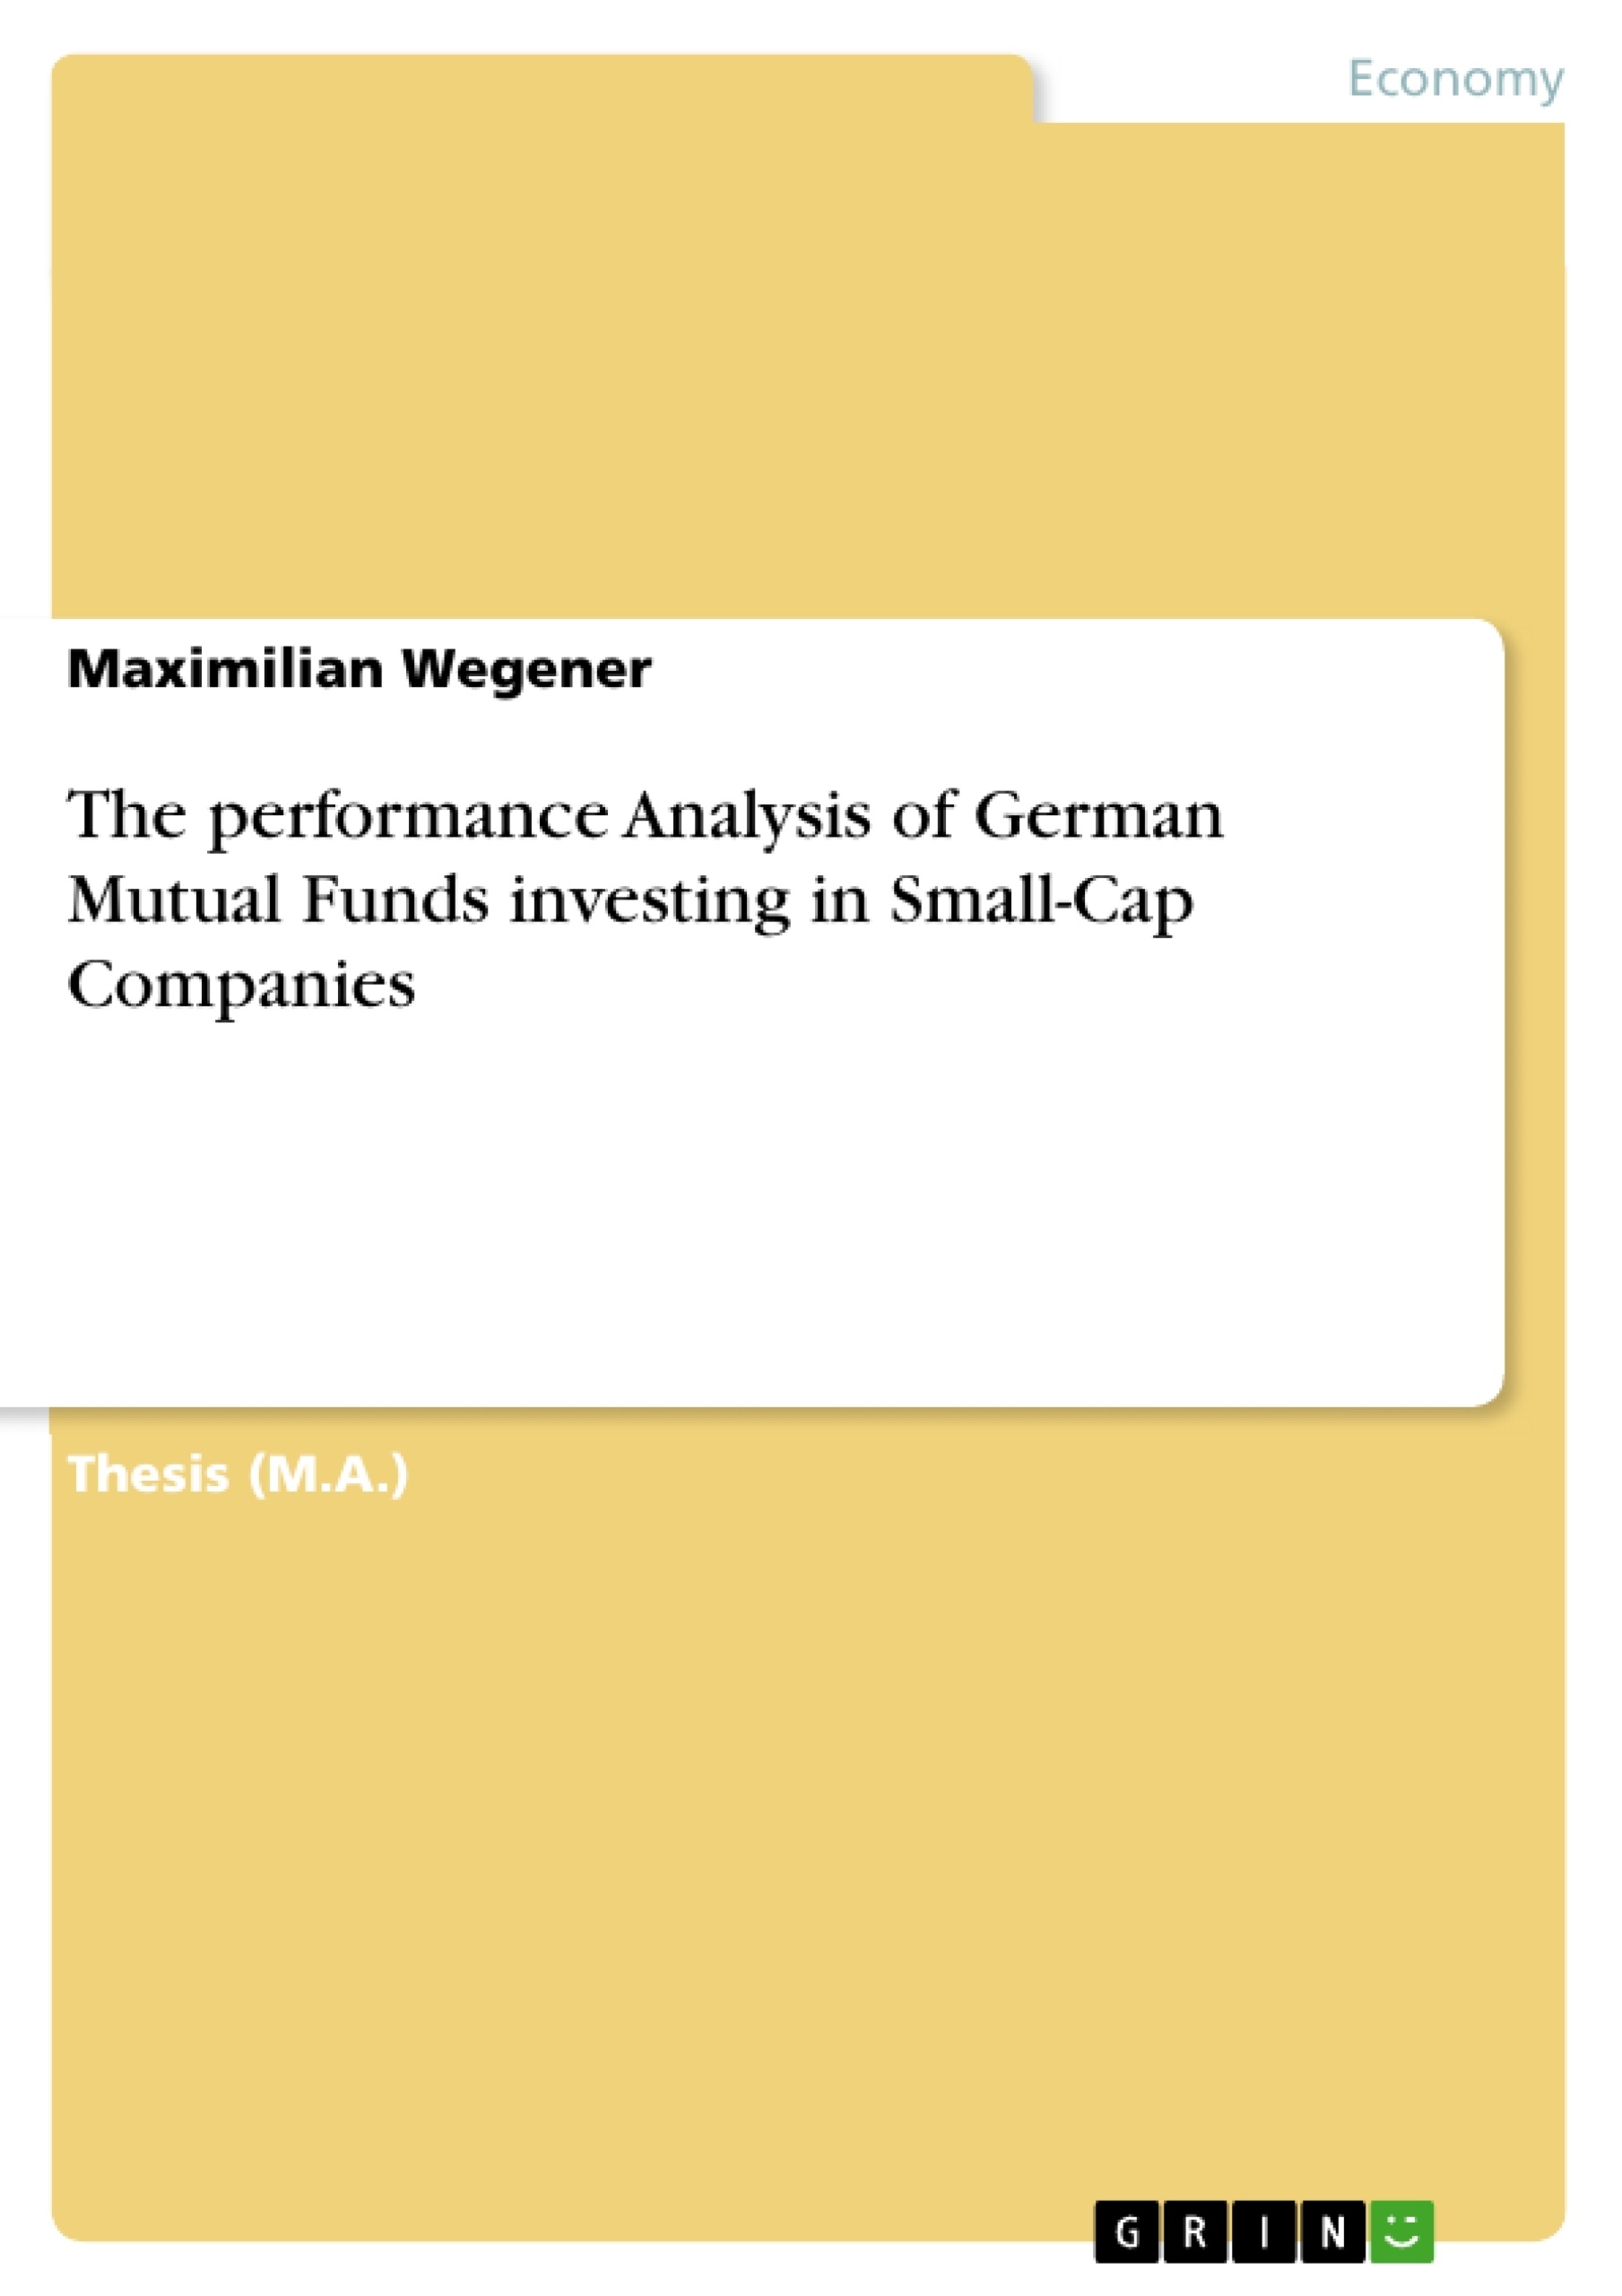 Title: The performance Analysis of German Mutual Funds investing in Small-Cap Companies